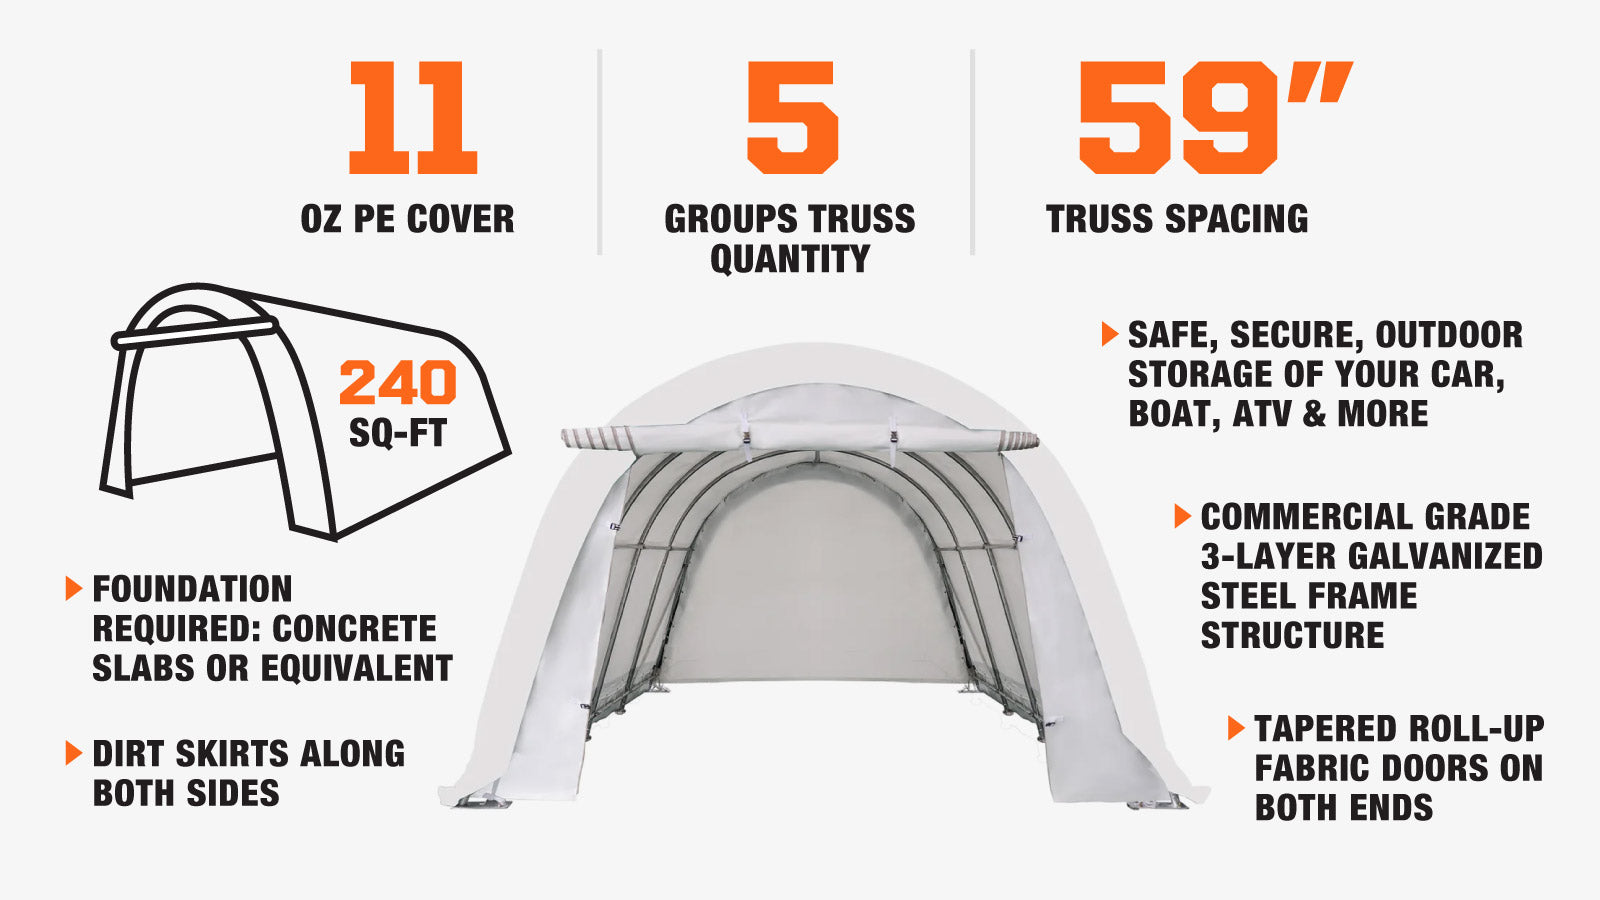 TMG Industrial 12’ x 20’ Car Shelter w/Rounded Roof & Heavy-Duty 11 OZ PE Fabric Cover, Galvanized Steel Frame, Roll-Up Doors, TMG-ST1220R-description-image